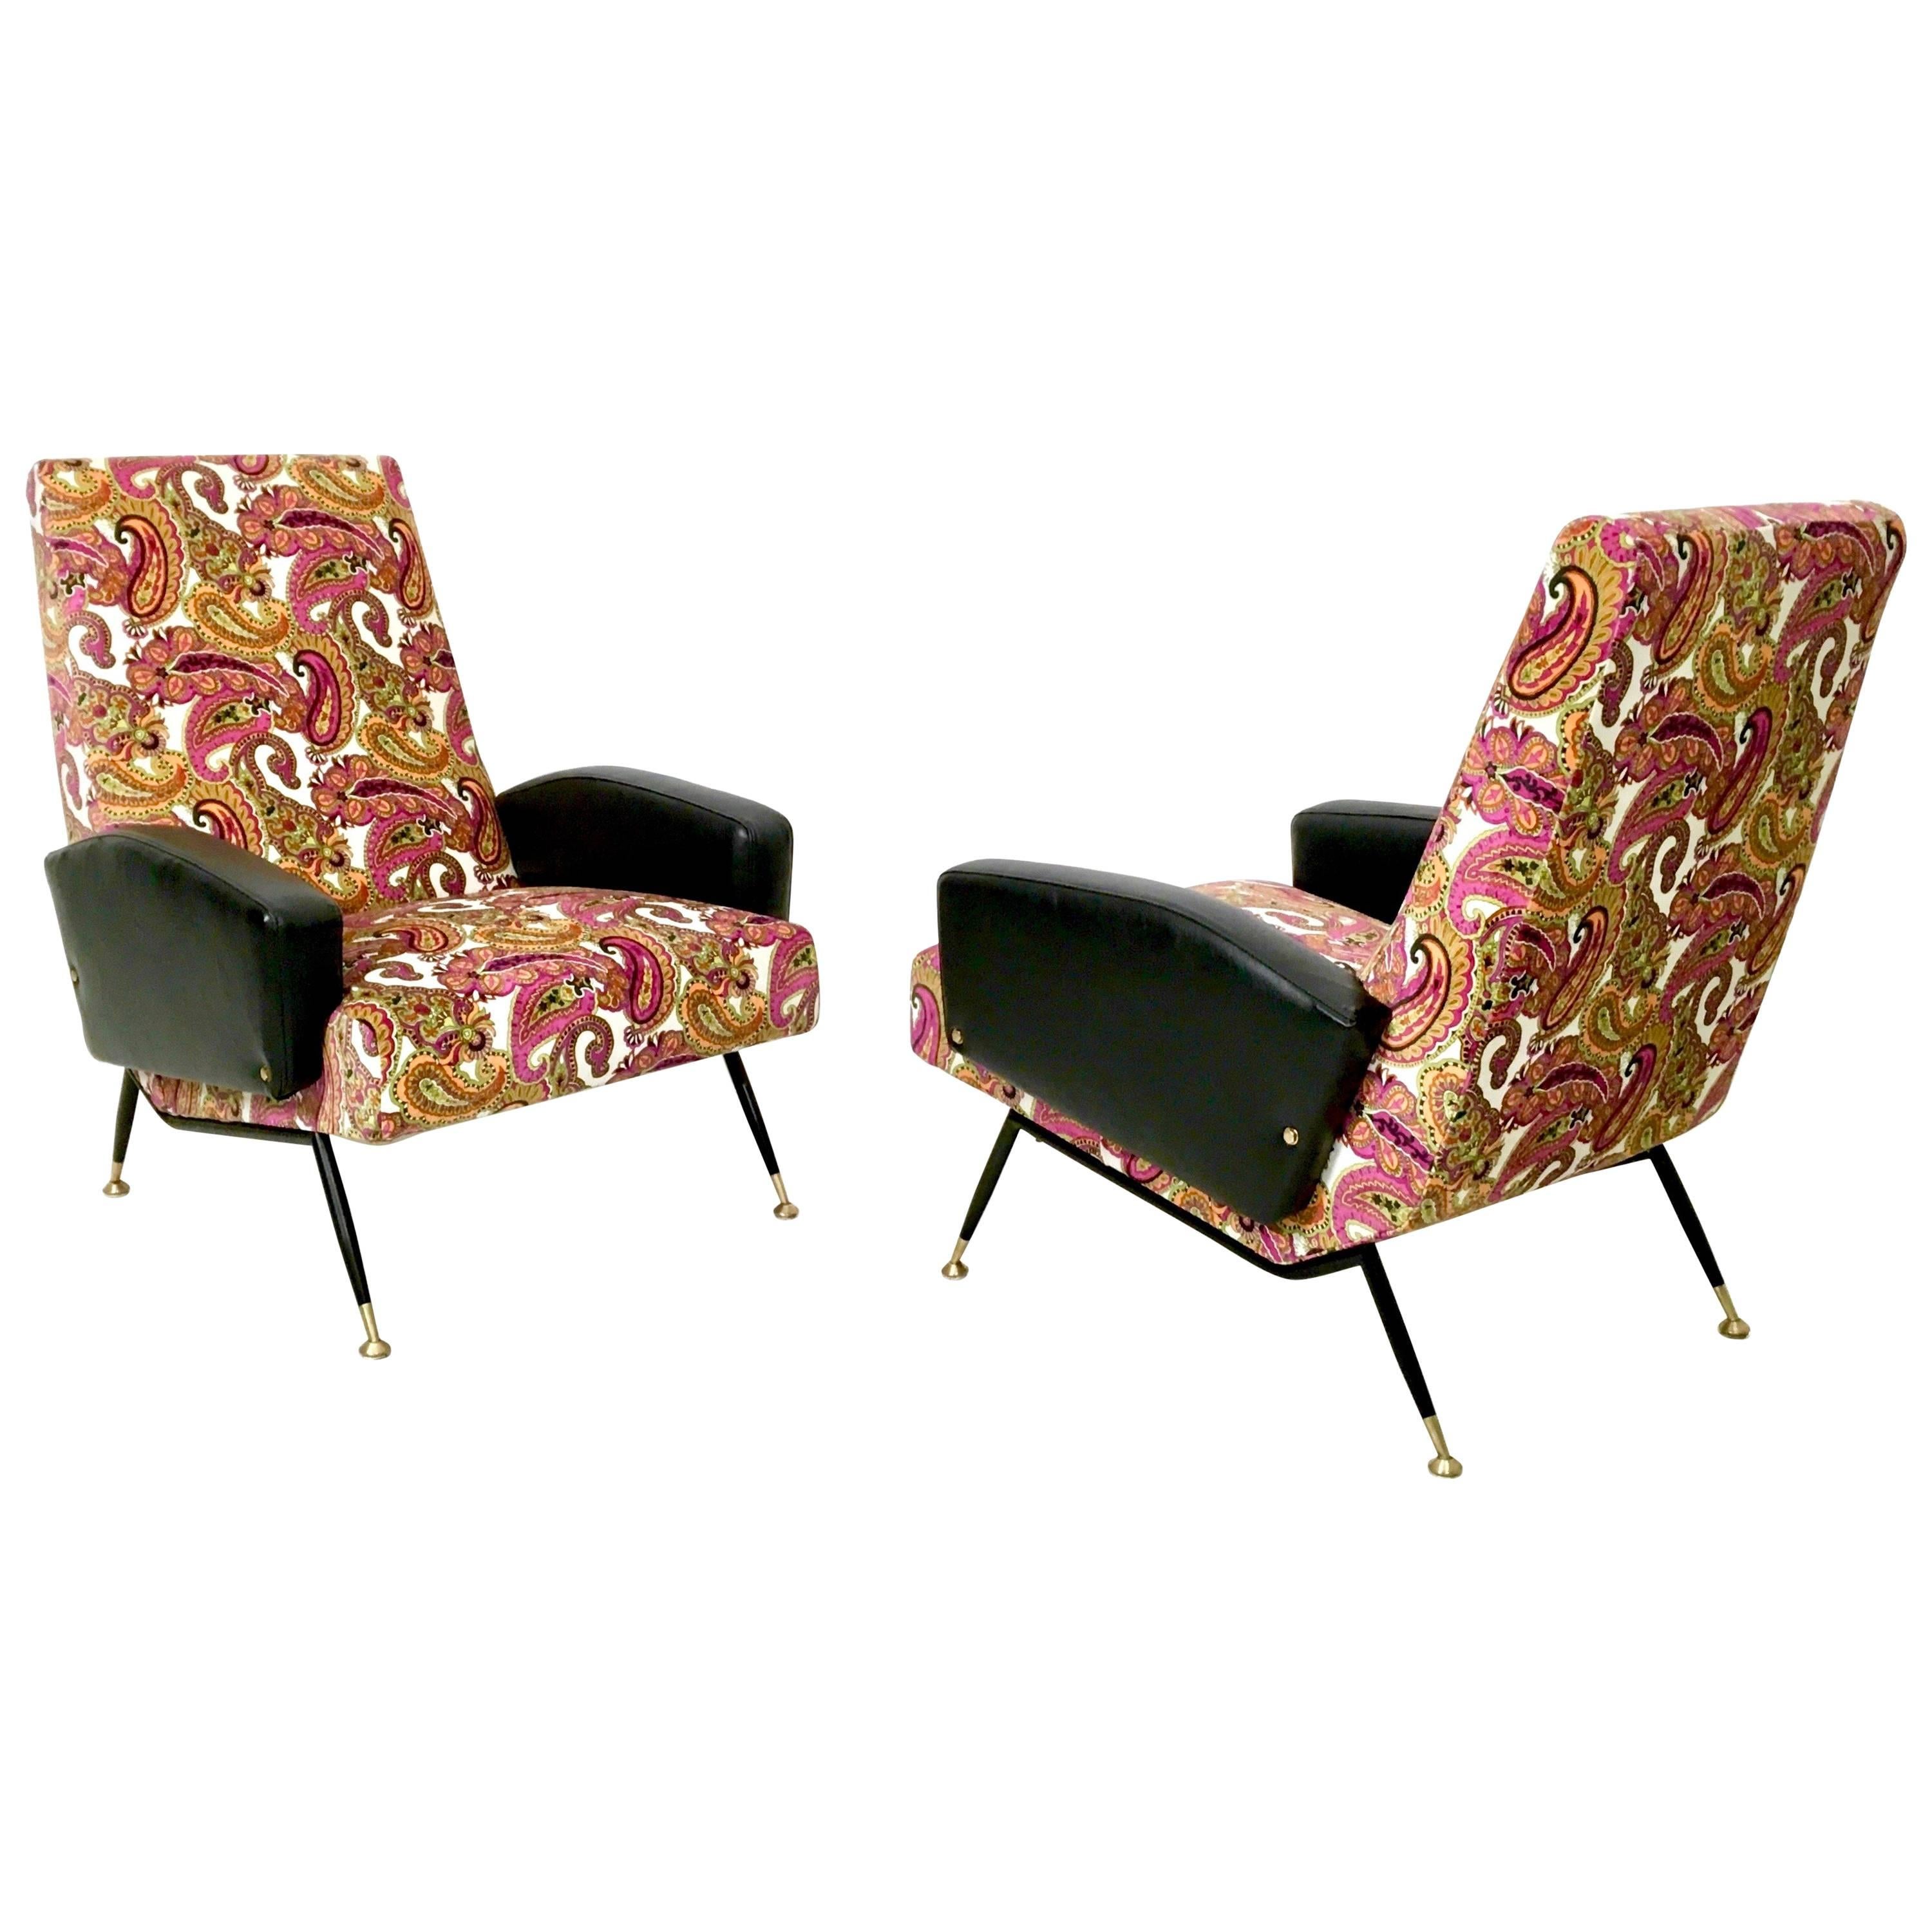 Pair of Patterned Velvet and Black Skai Armchairs, Italy 1950s